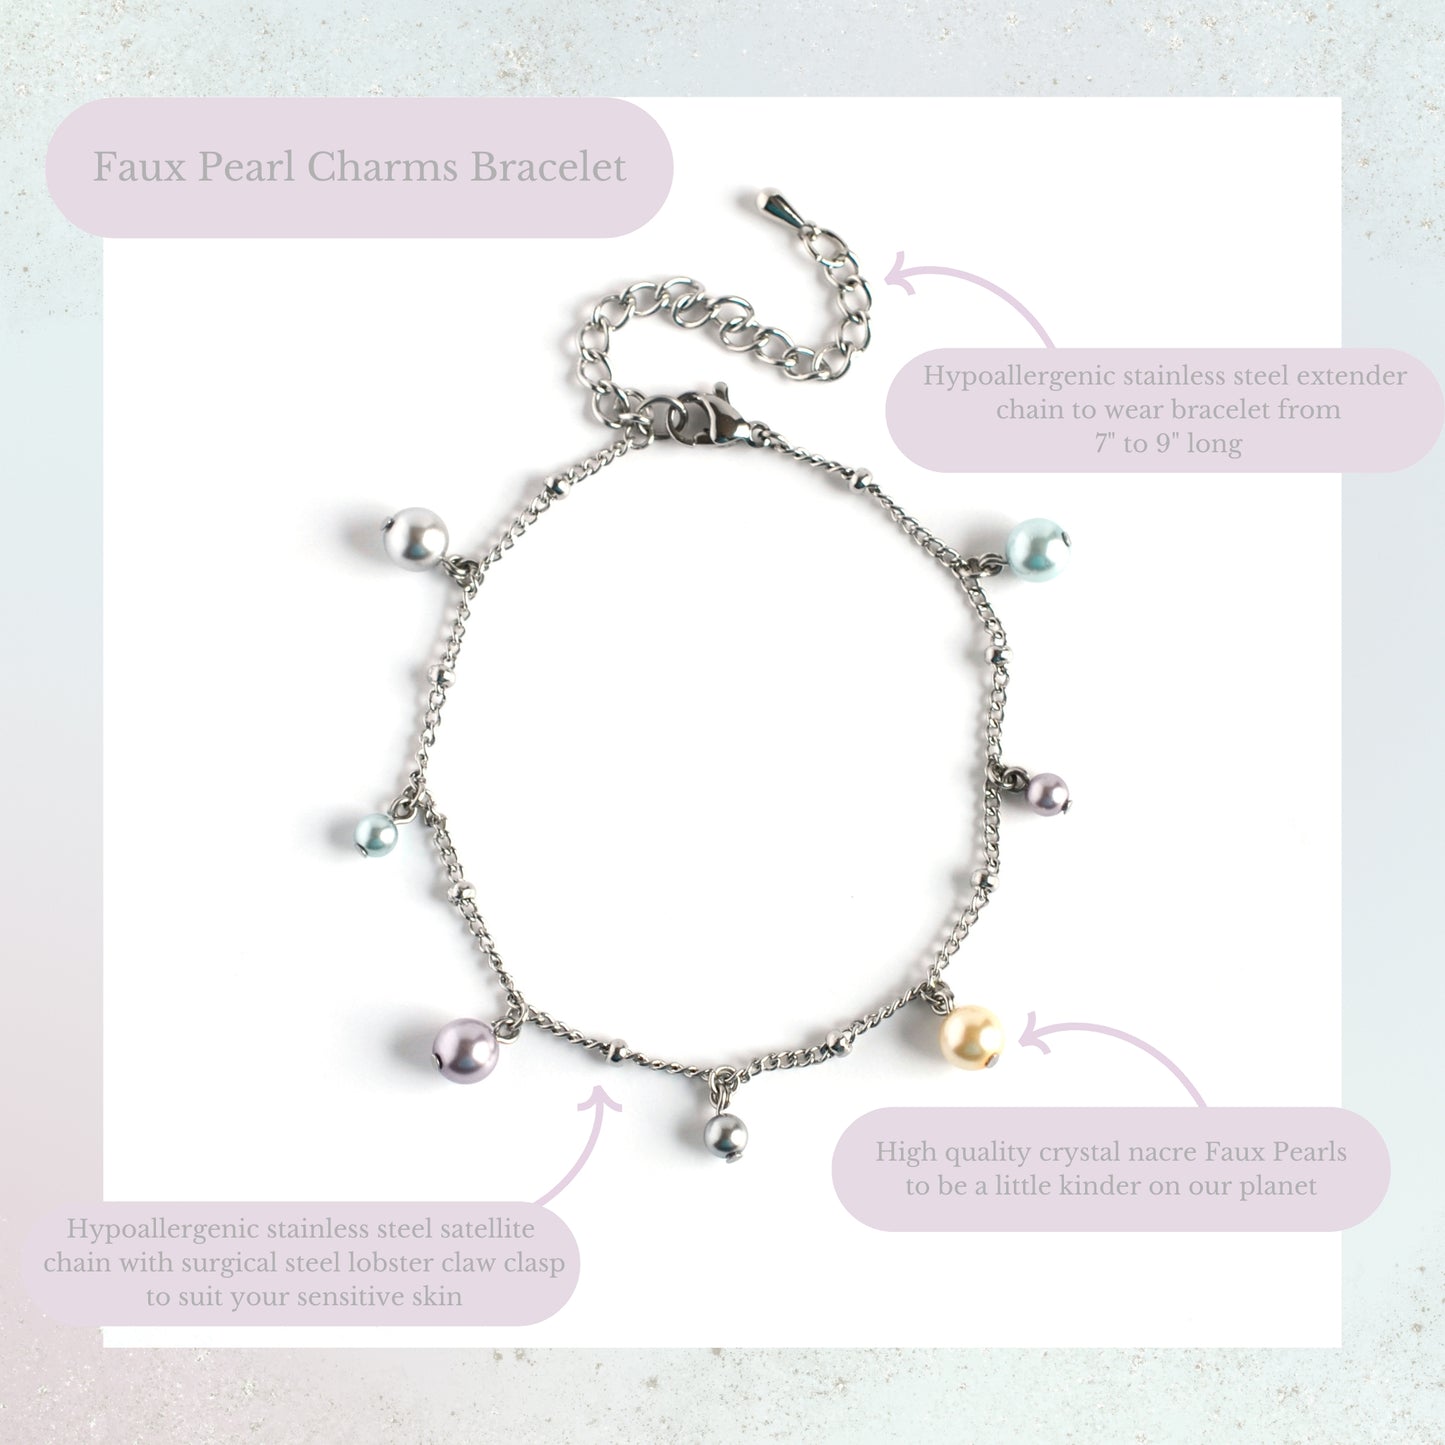 Faux pearl charms bracelet product information graphic